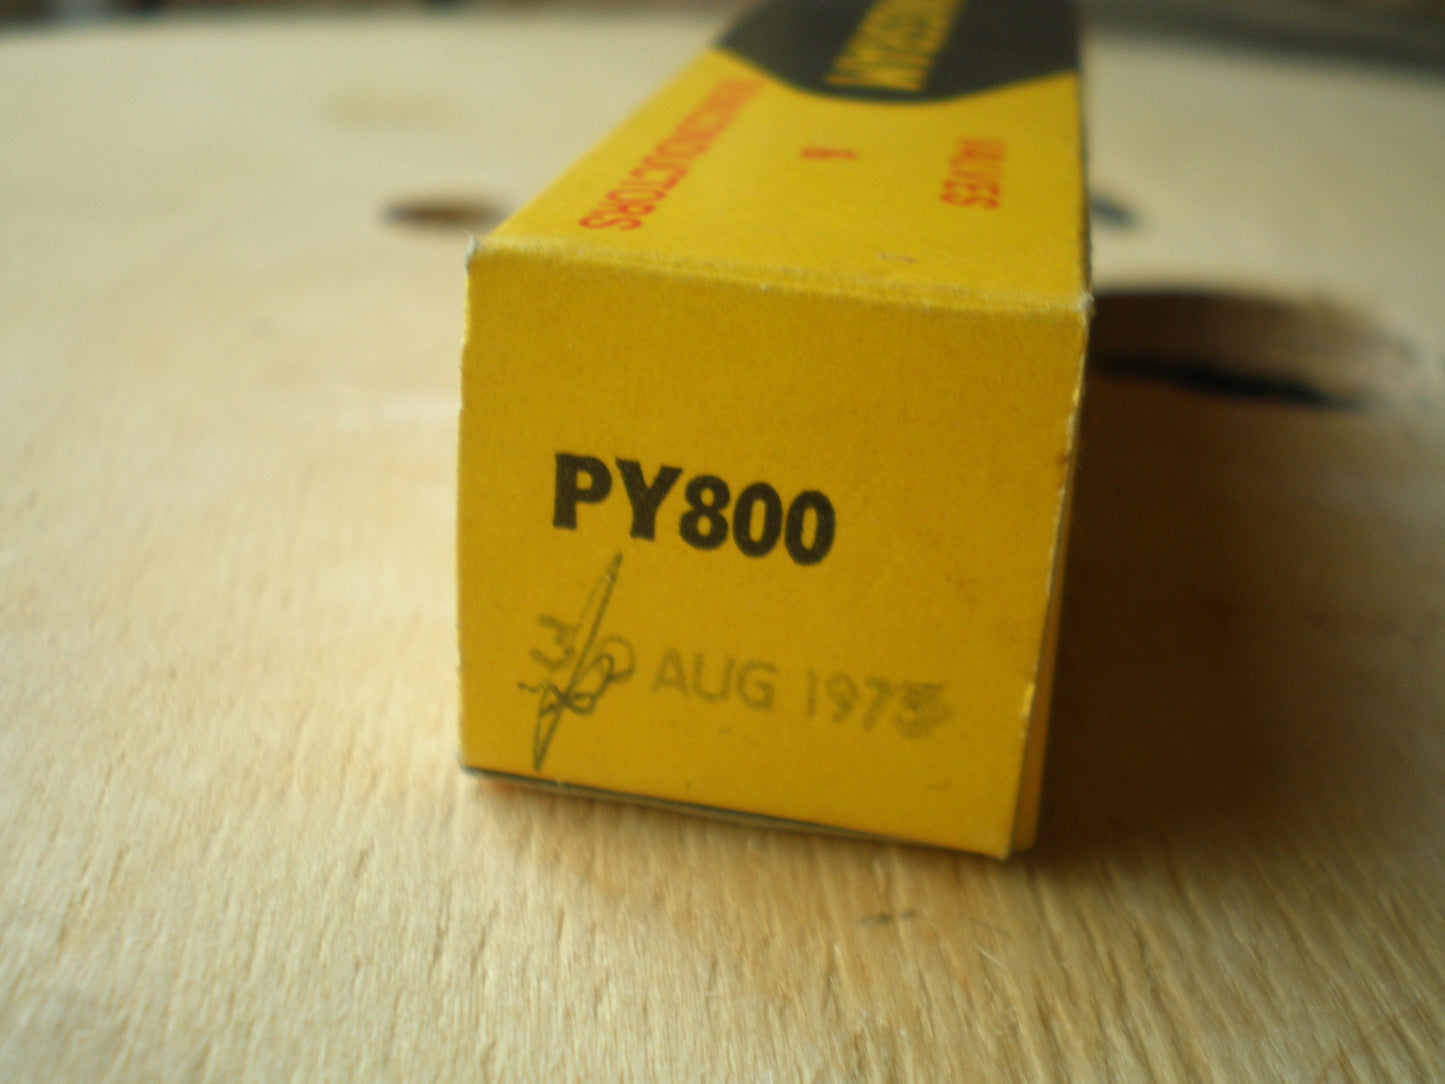 PY800 Valve used in old tape recorders